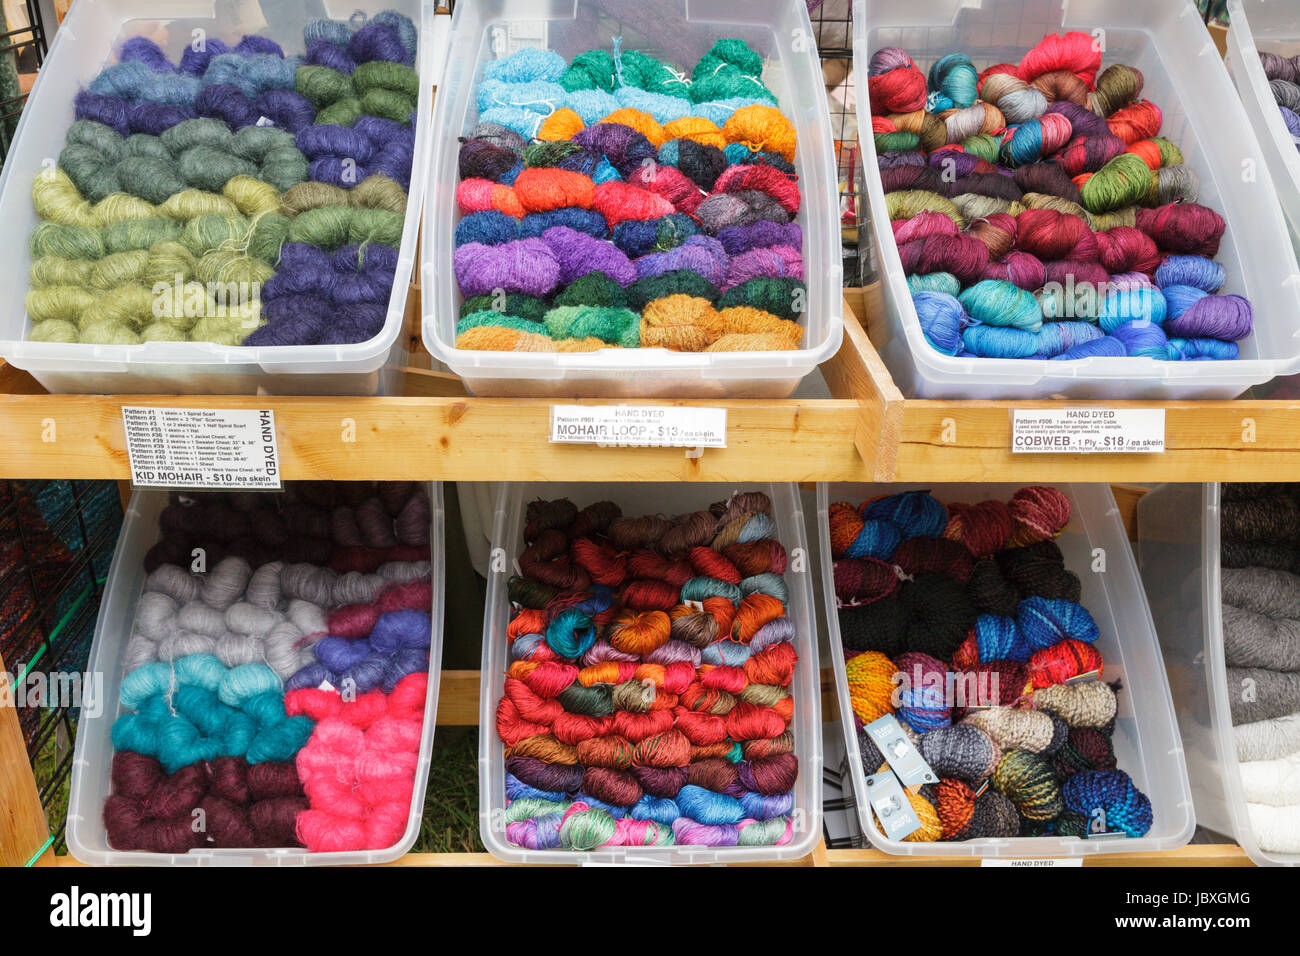 BOUCKVILLE, NY, USA - JUNE 10 2017: Bins of skeins for sale at the annual Fiber Festival of Central New York. Stock Photo